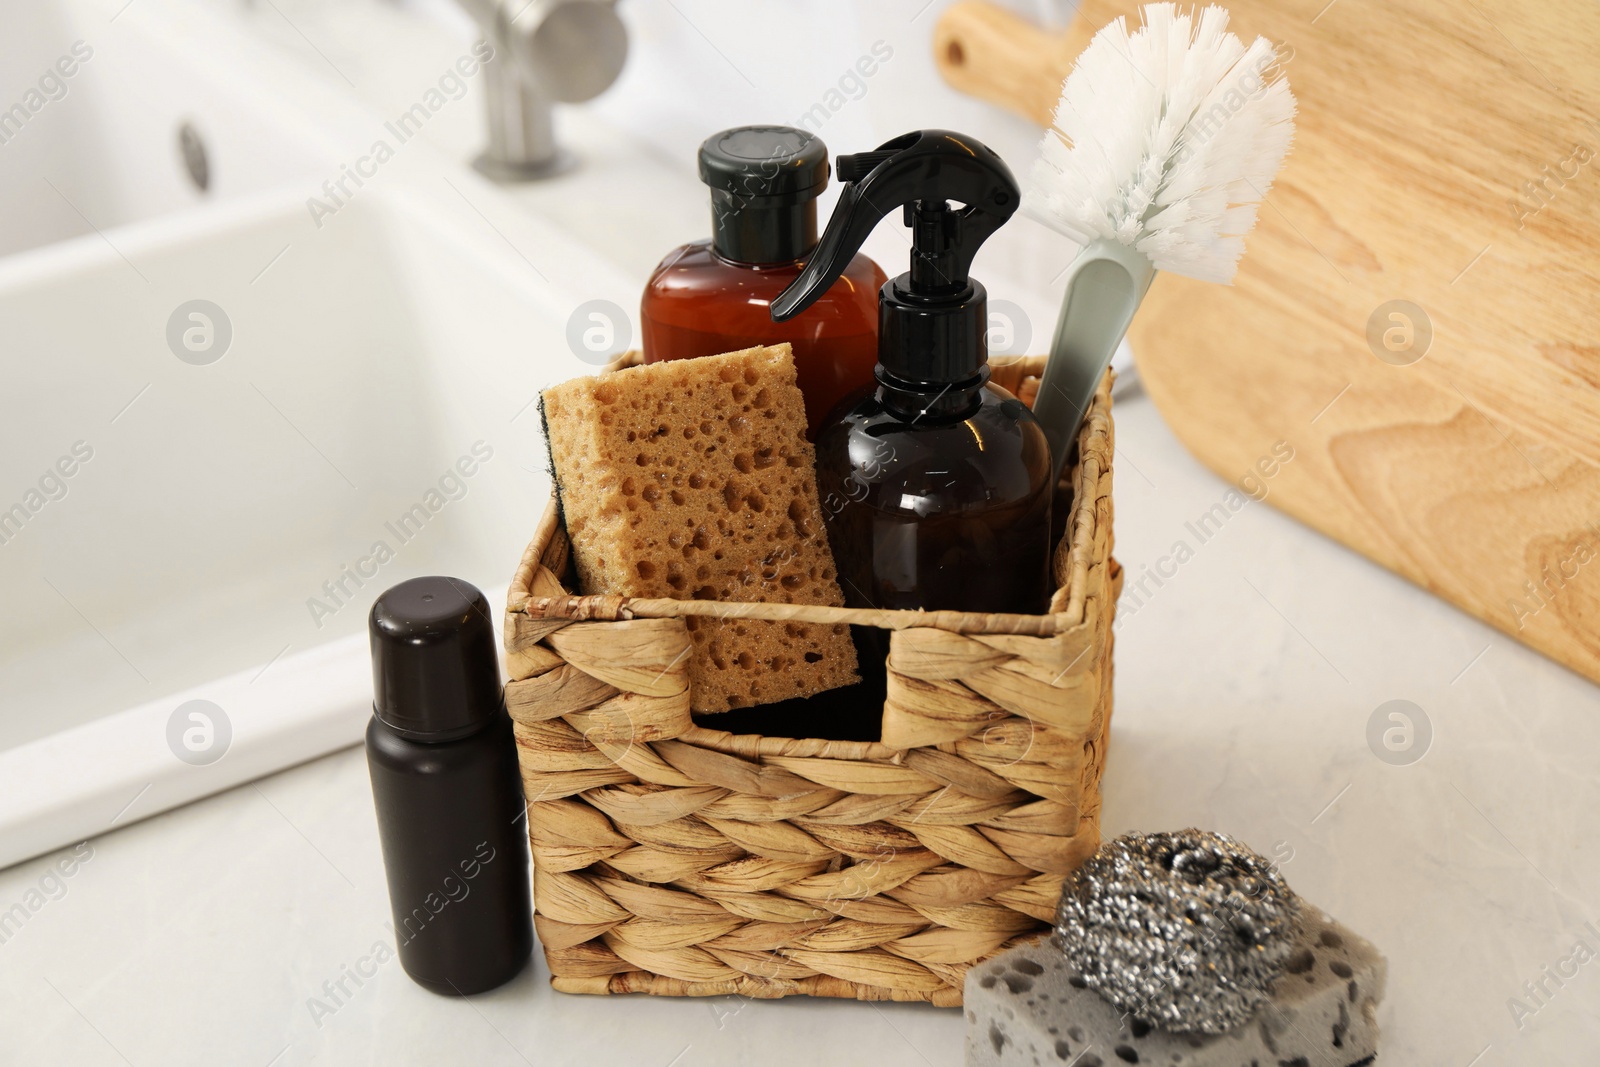 Photo of Different cleaning supplies in basket on countertop